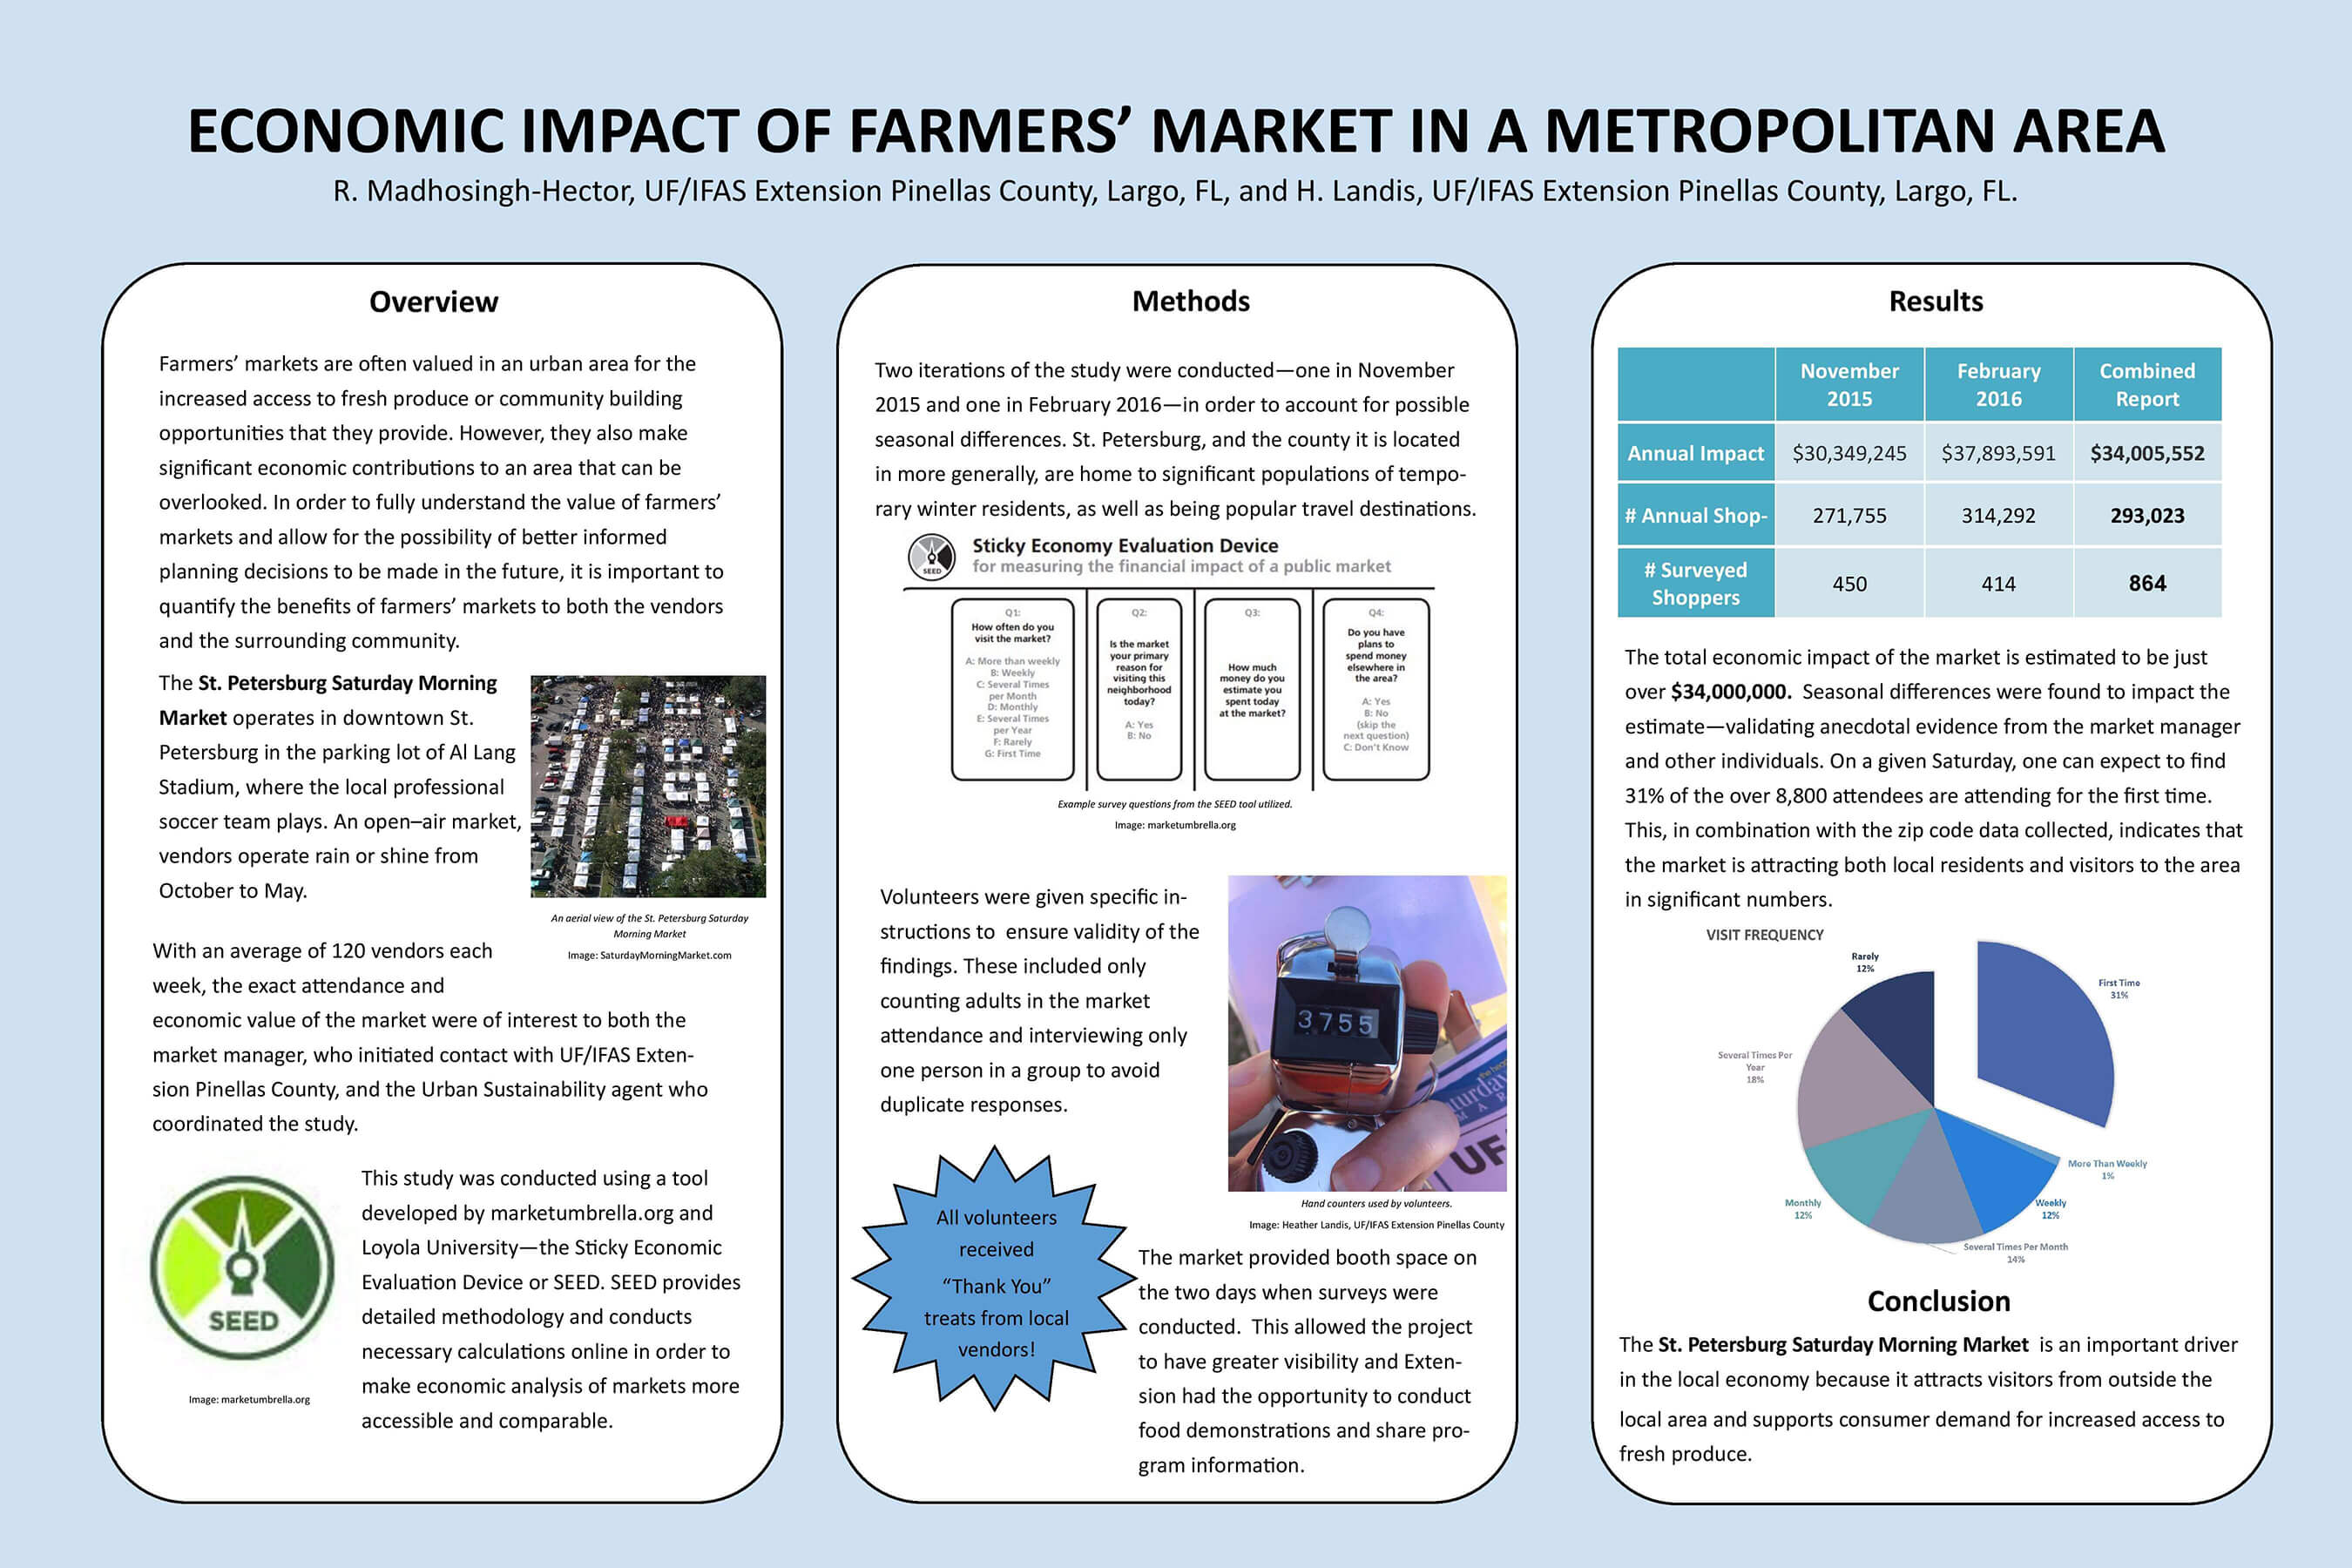 9-Economic-Impact-of-Farmers-Markets-Madhosingh-Hector-compressed-resized